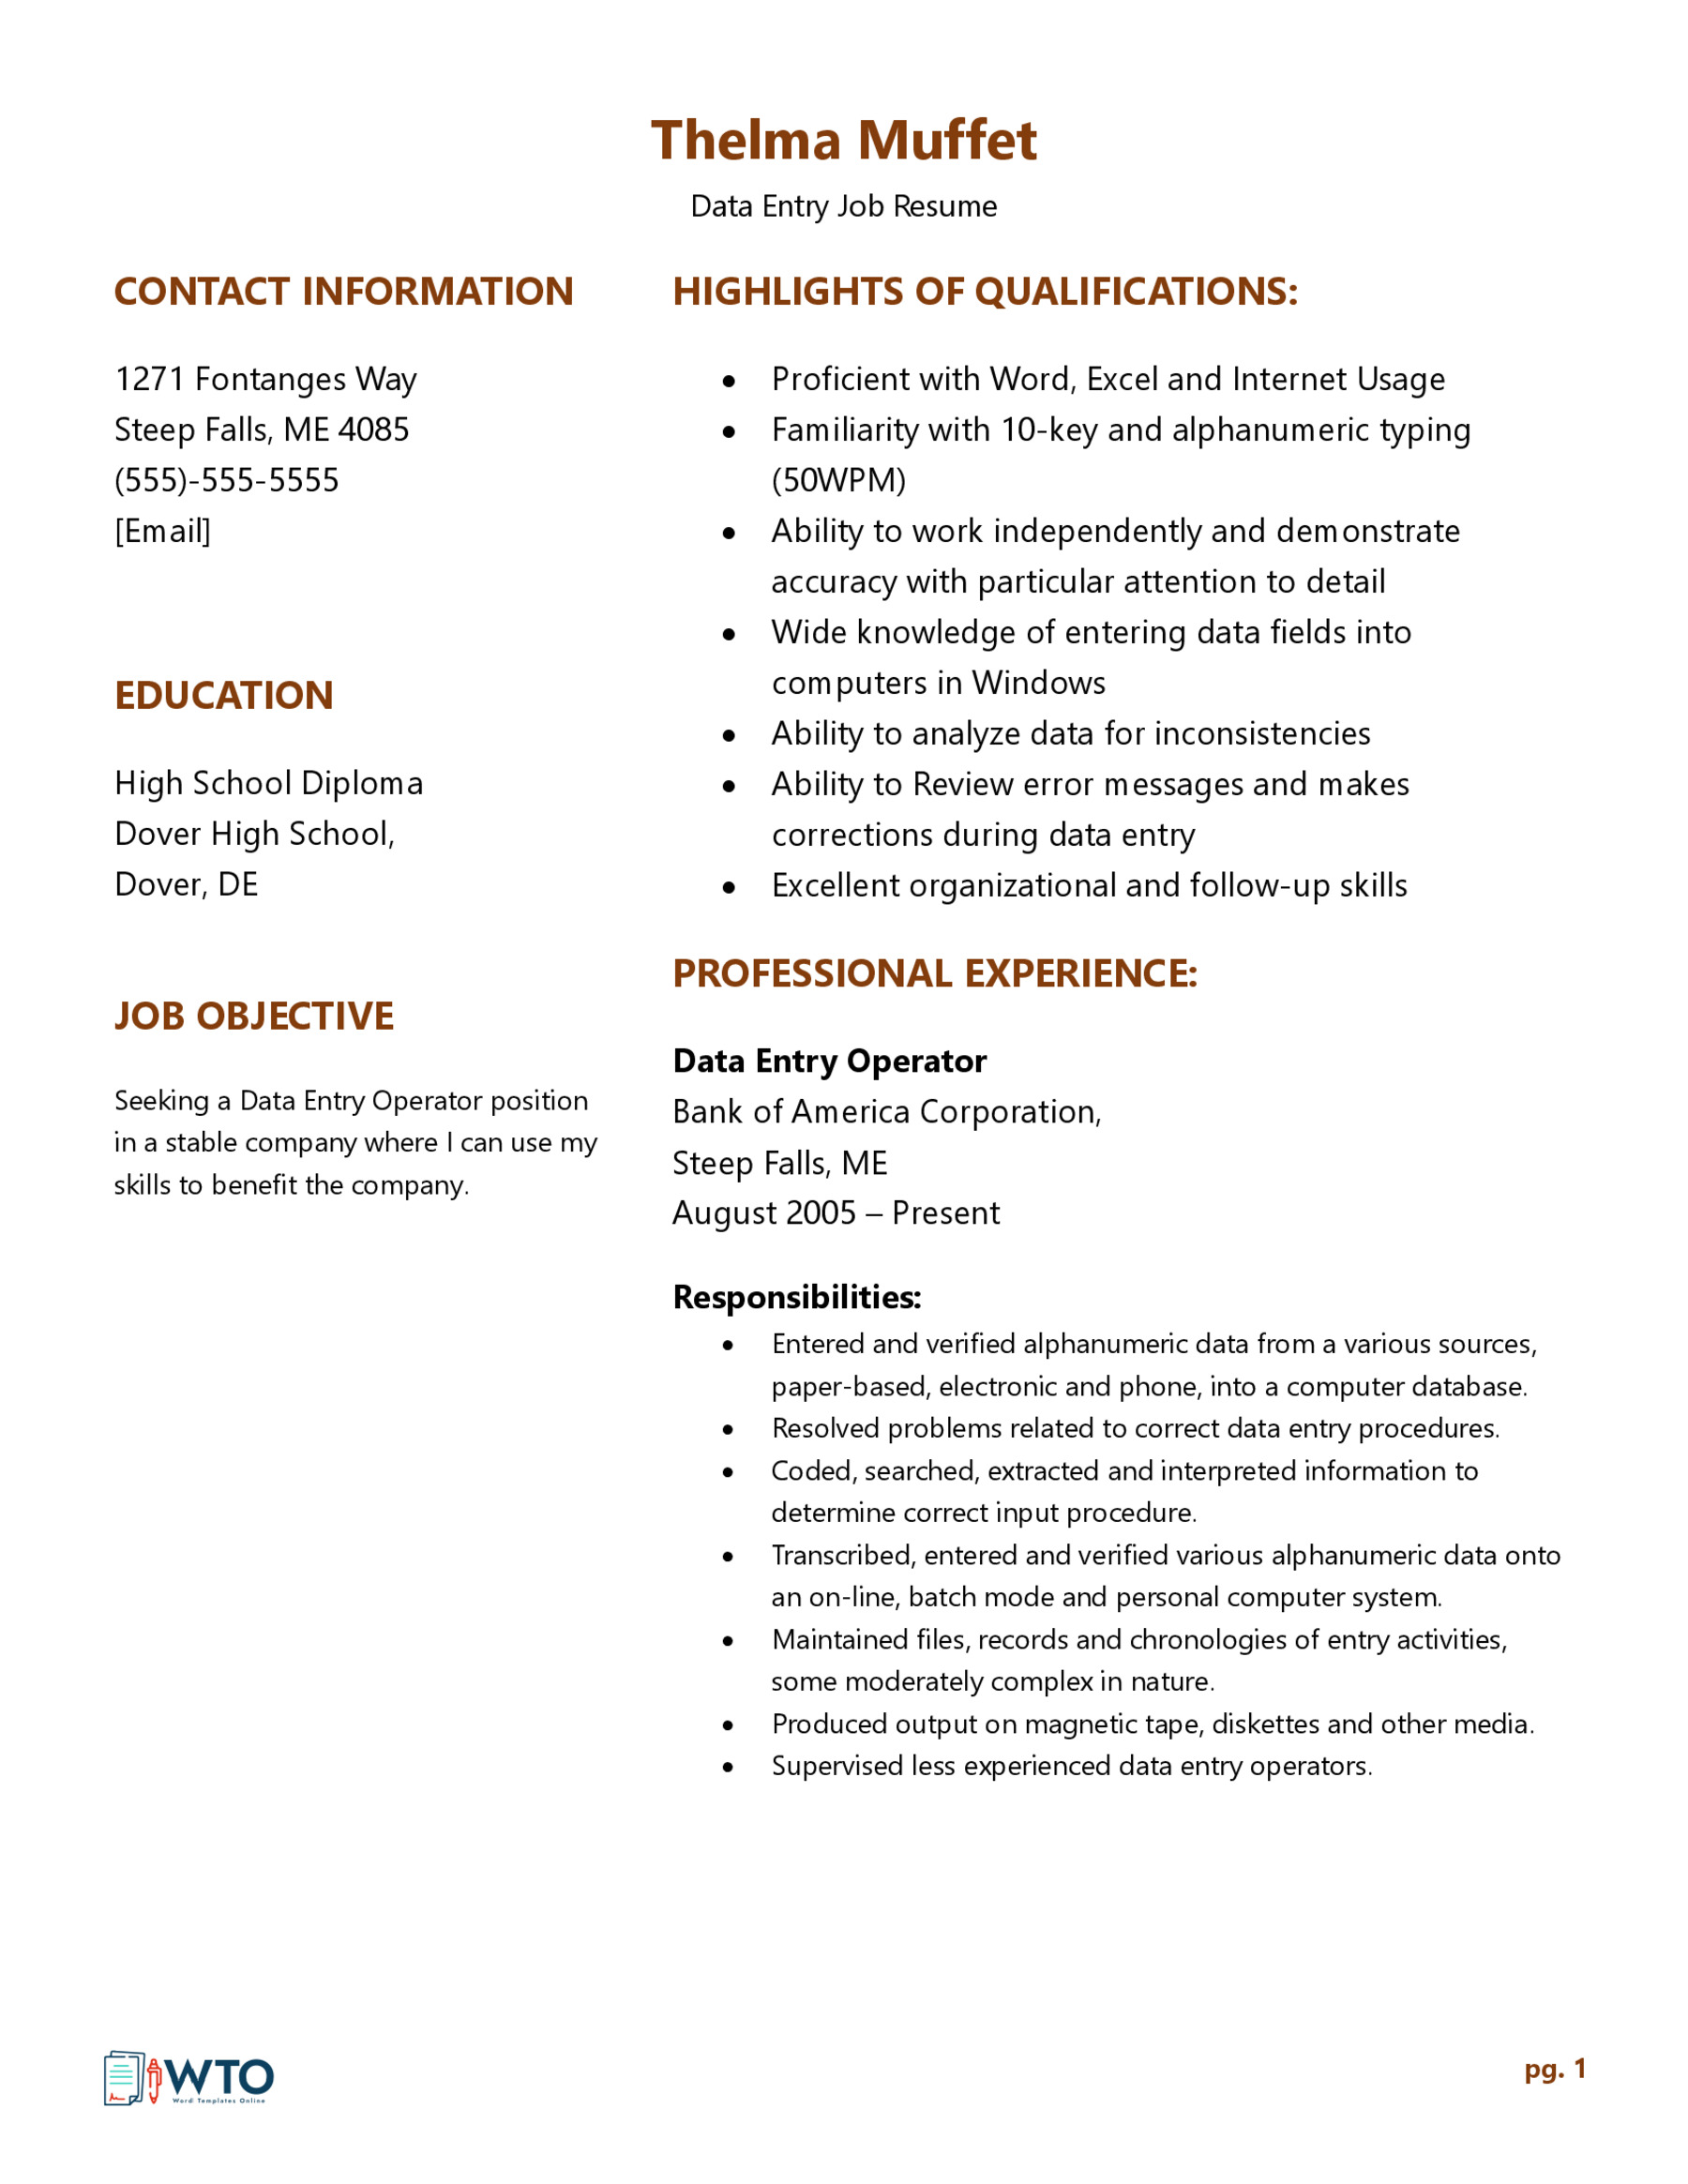 Data Entry Job Resume - Well-Structured Sample